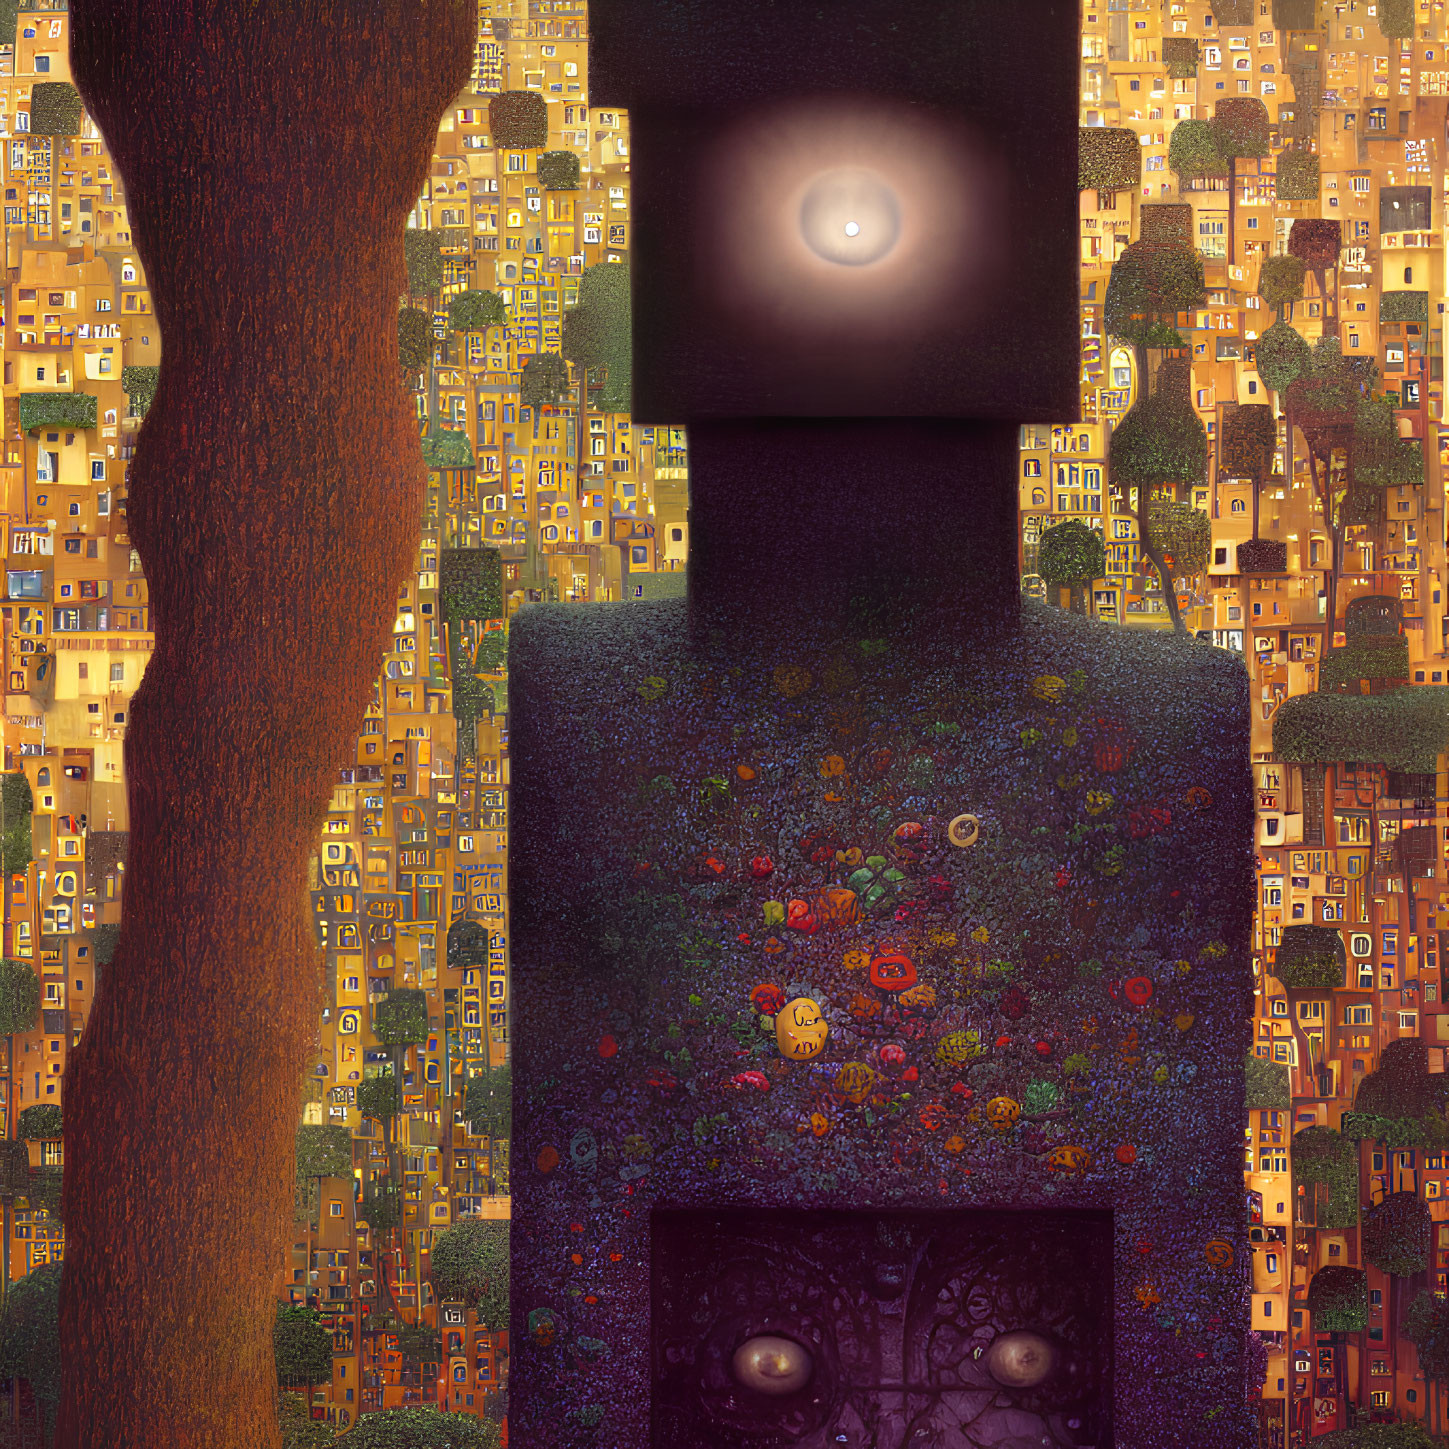 Surreal tall figure with galaxy torso in whimsical village scene